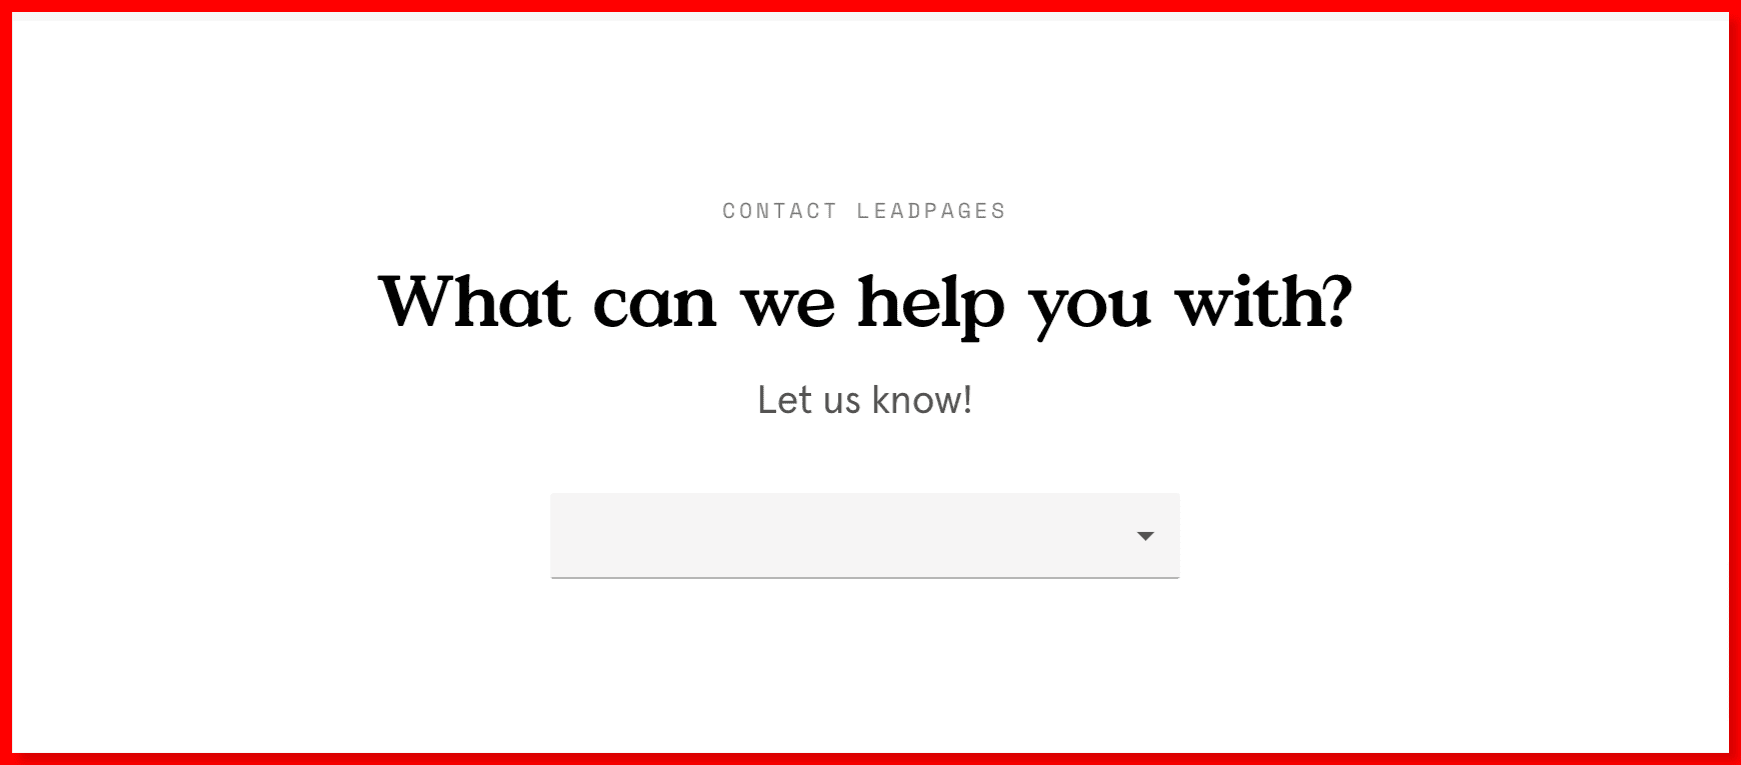 Contact-Leadpages-Support